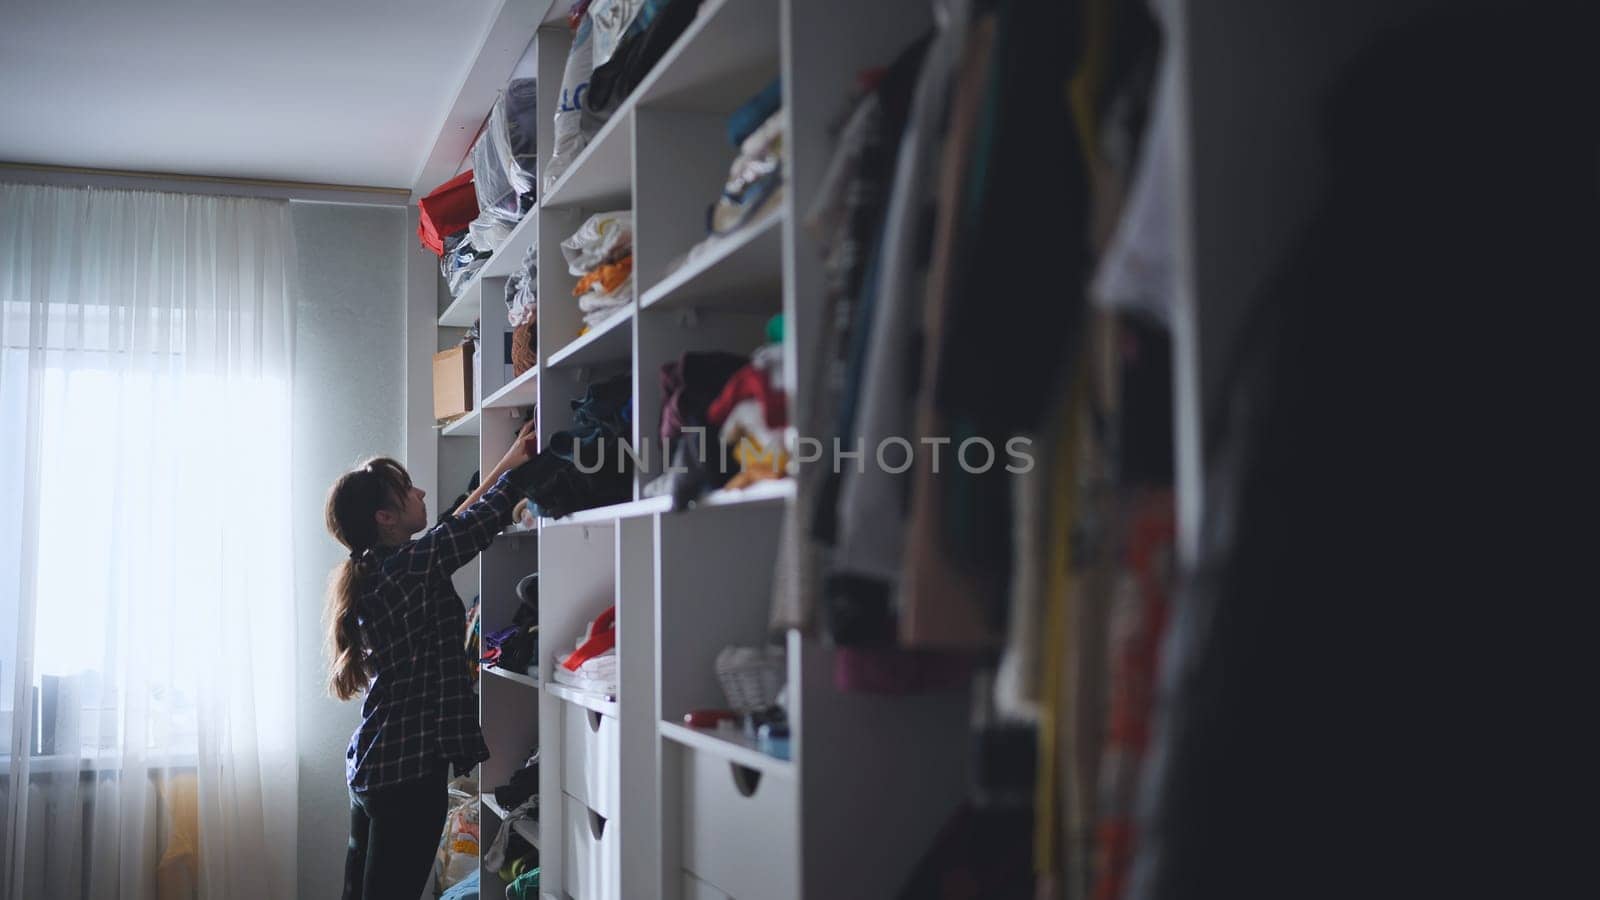 The mother is a housewife looking for clothes in the closet